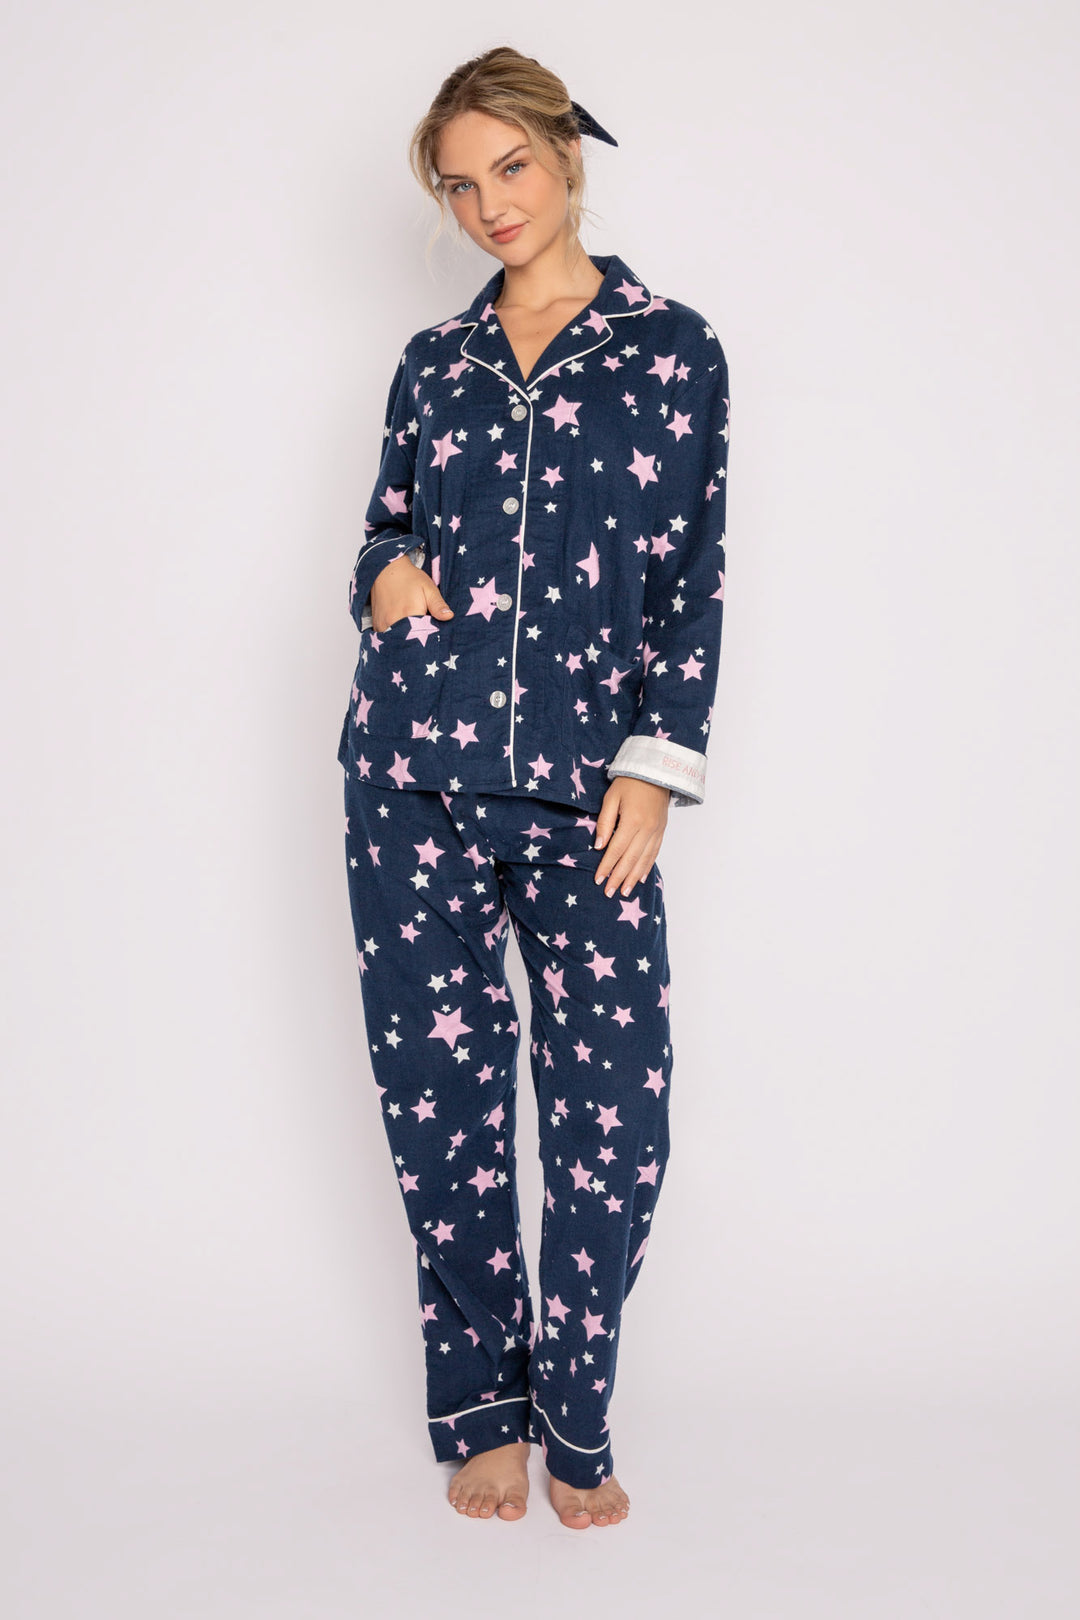 Cotton flannel pj set in navy star print. Embroidered 'Rise & Shine & hair wrap. (7231870042212)